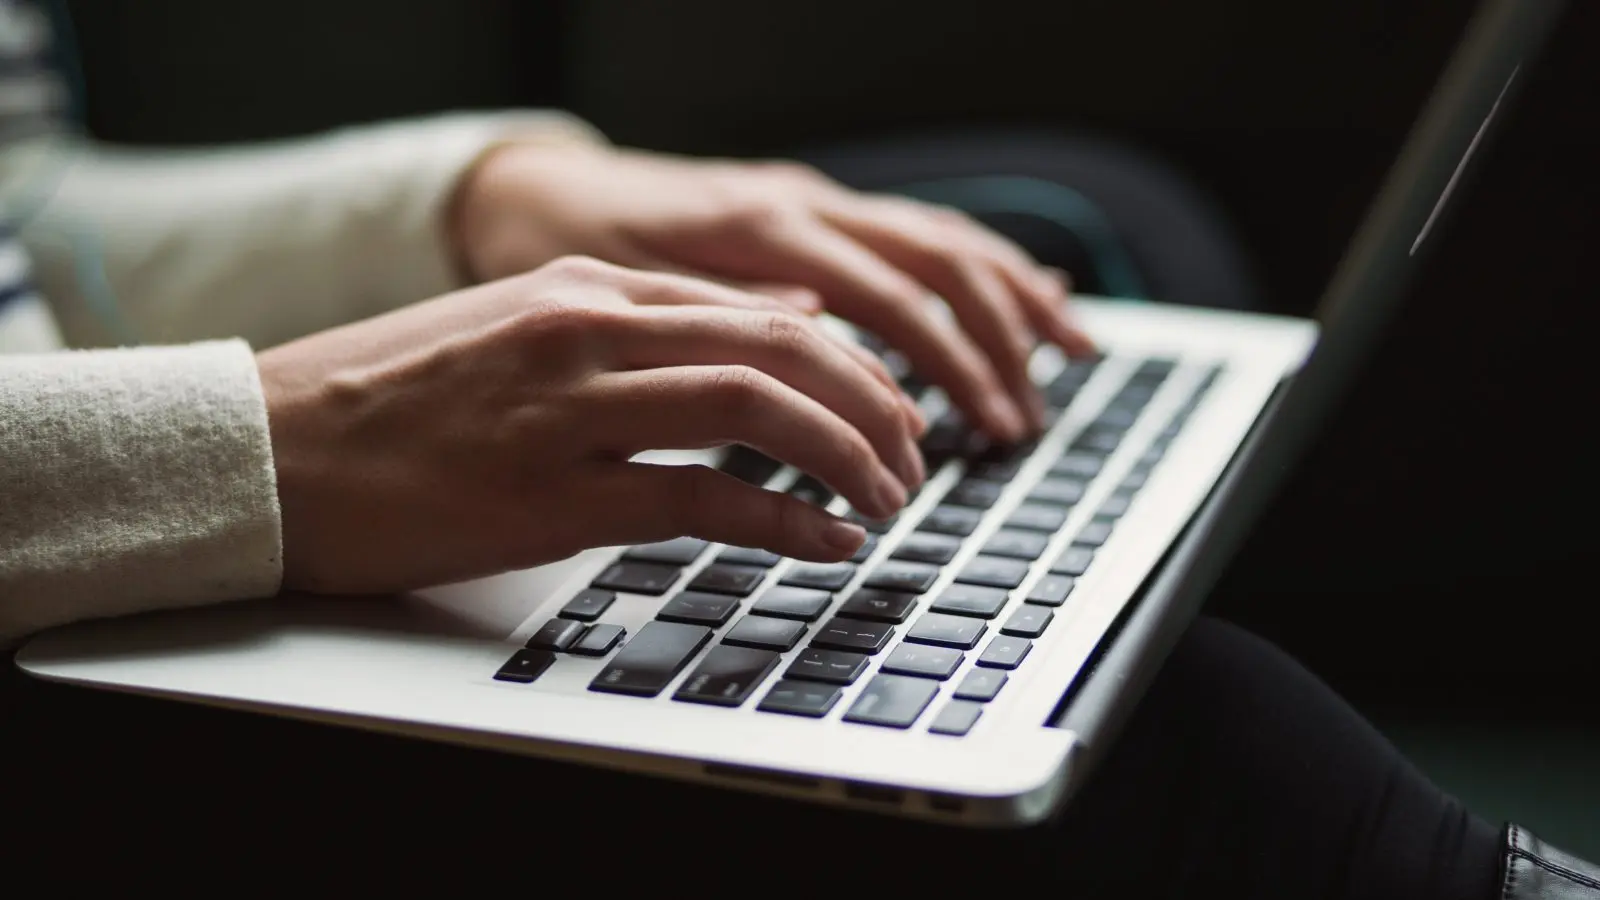 A person's hands typing on a laptop keyboard composing a GivingTuesday email.